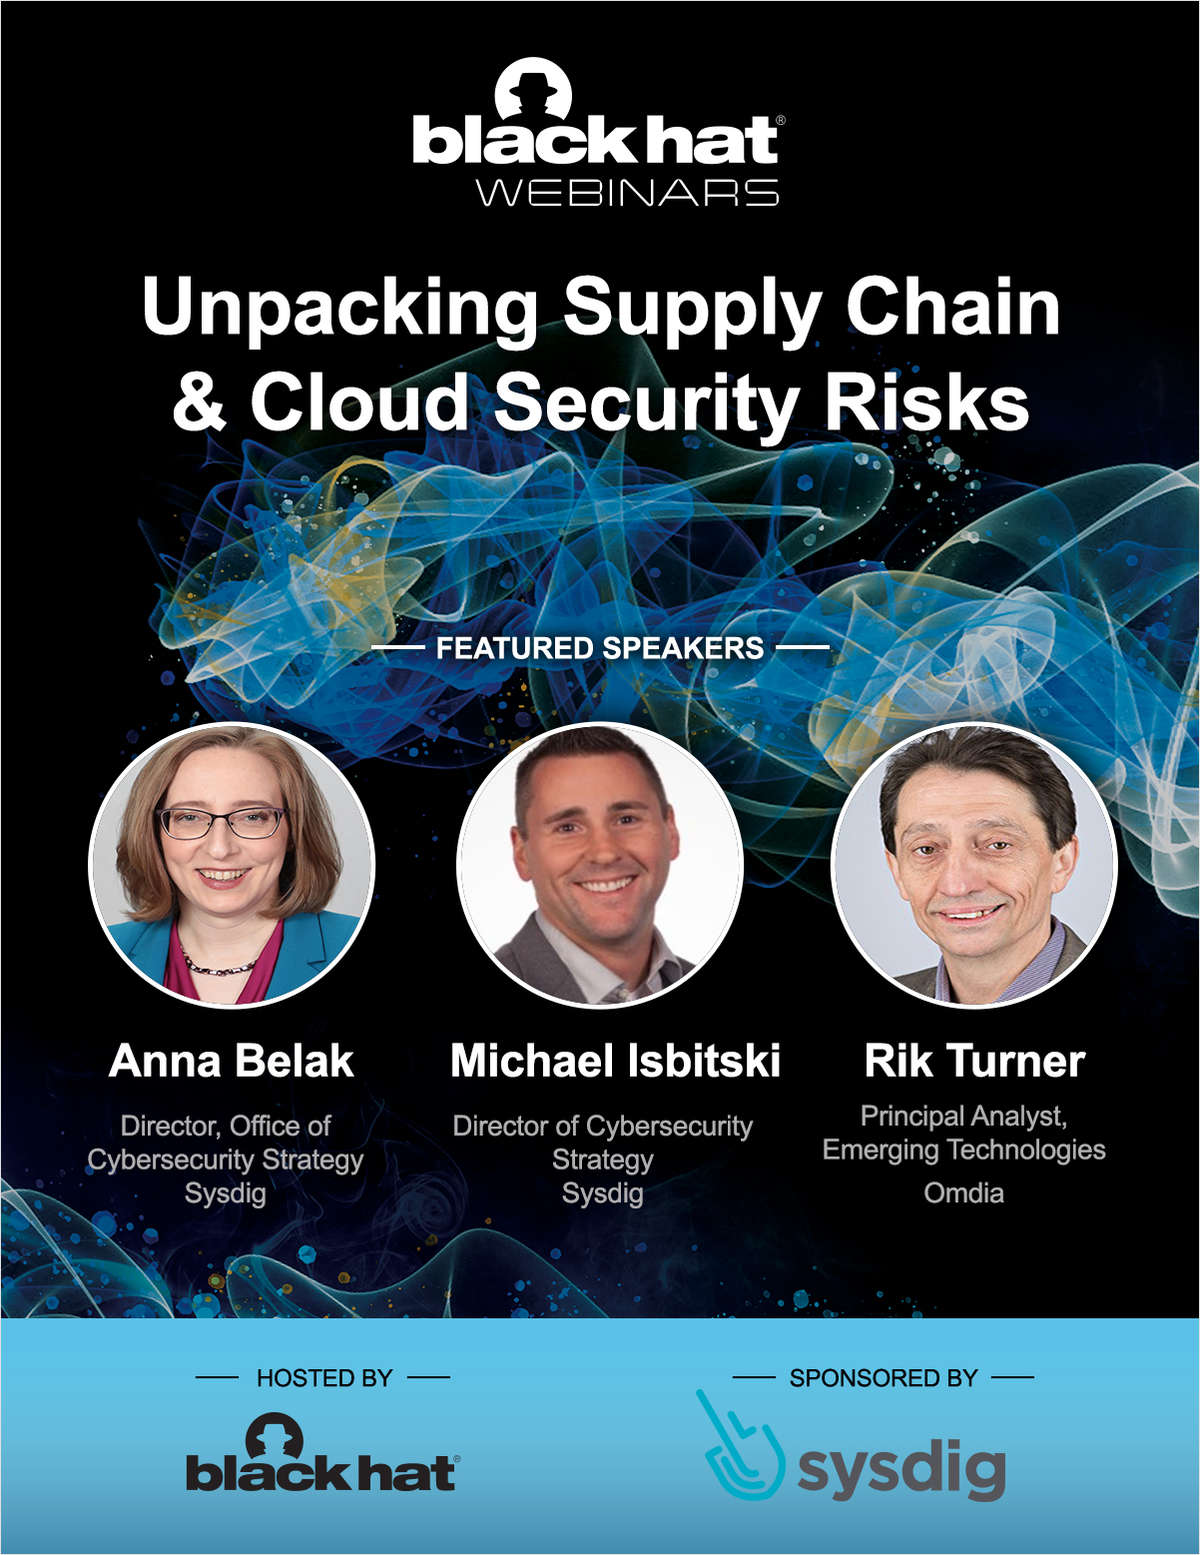 Unpacking Supply Chain & Cloud Security Risks